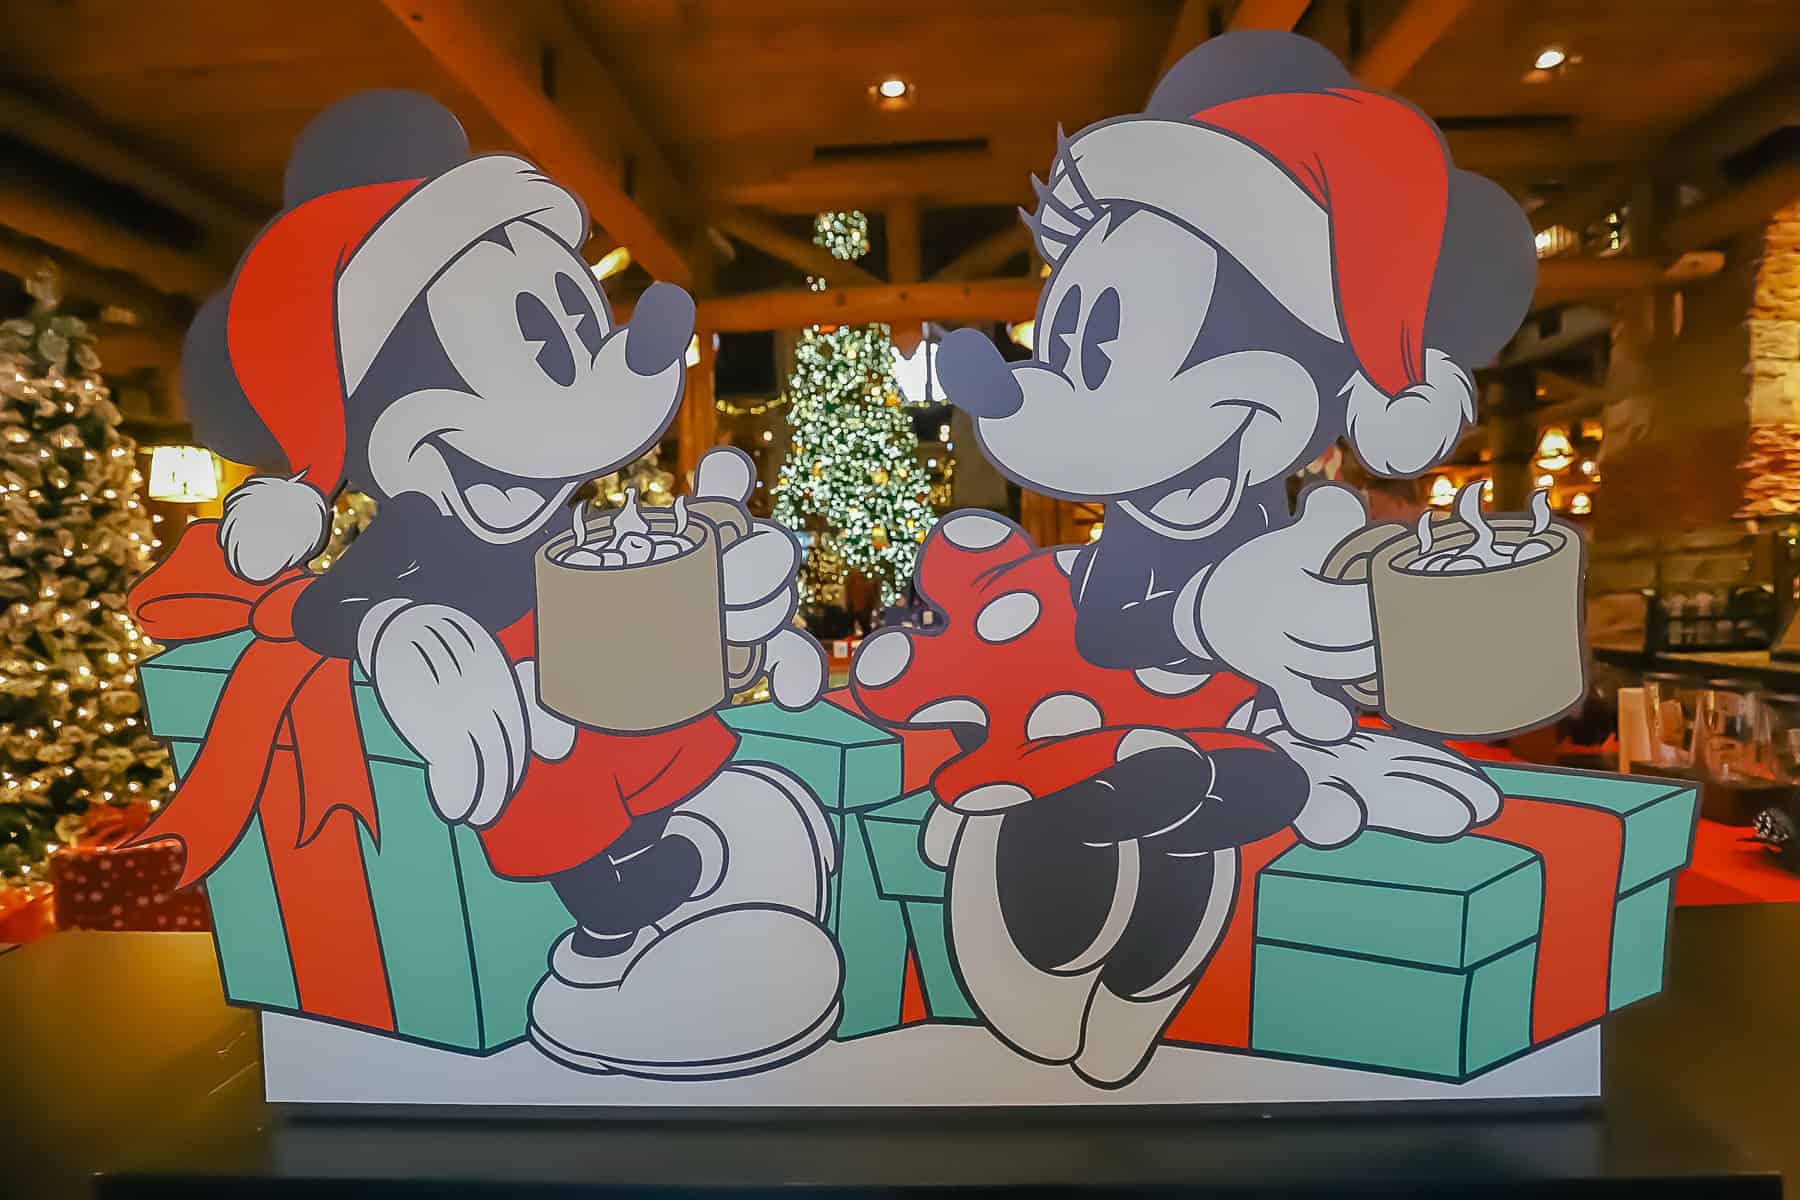 Cardboard cutout of Mickey and Minnie Mouse drinking hot chocolate 